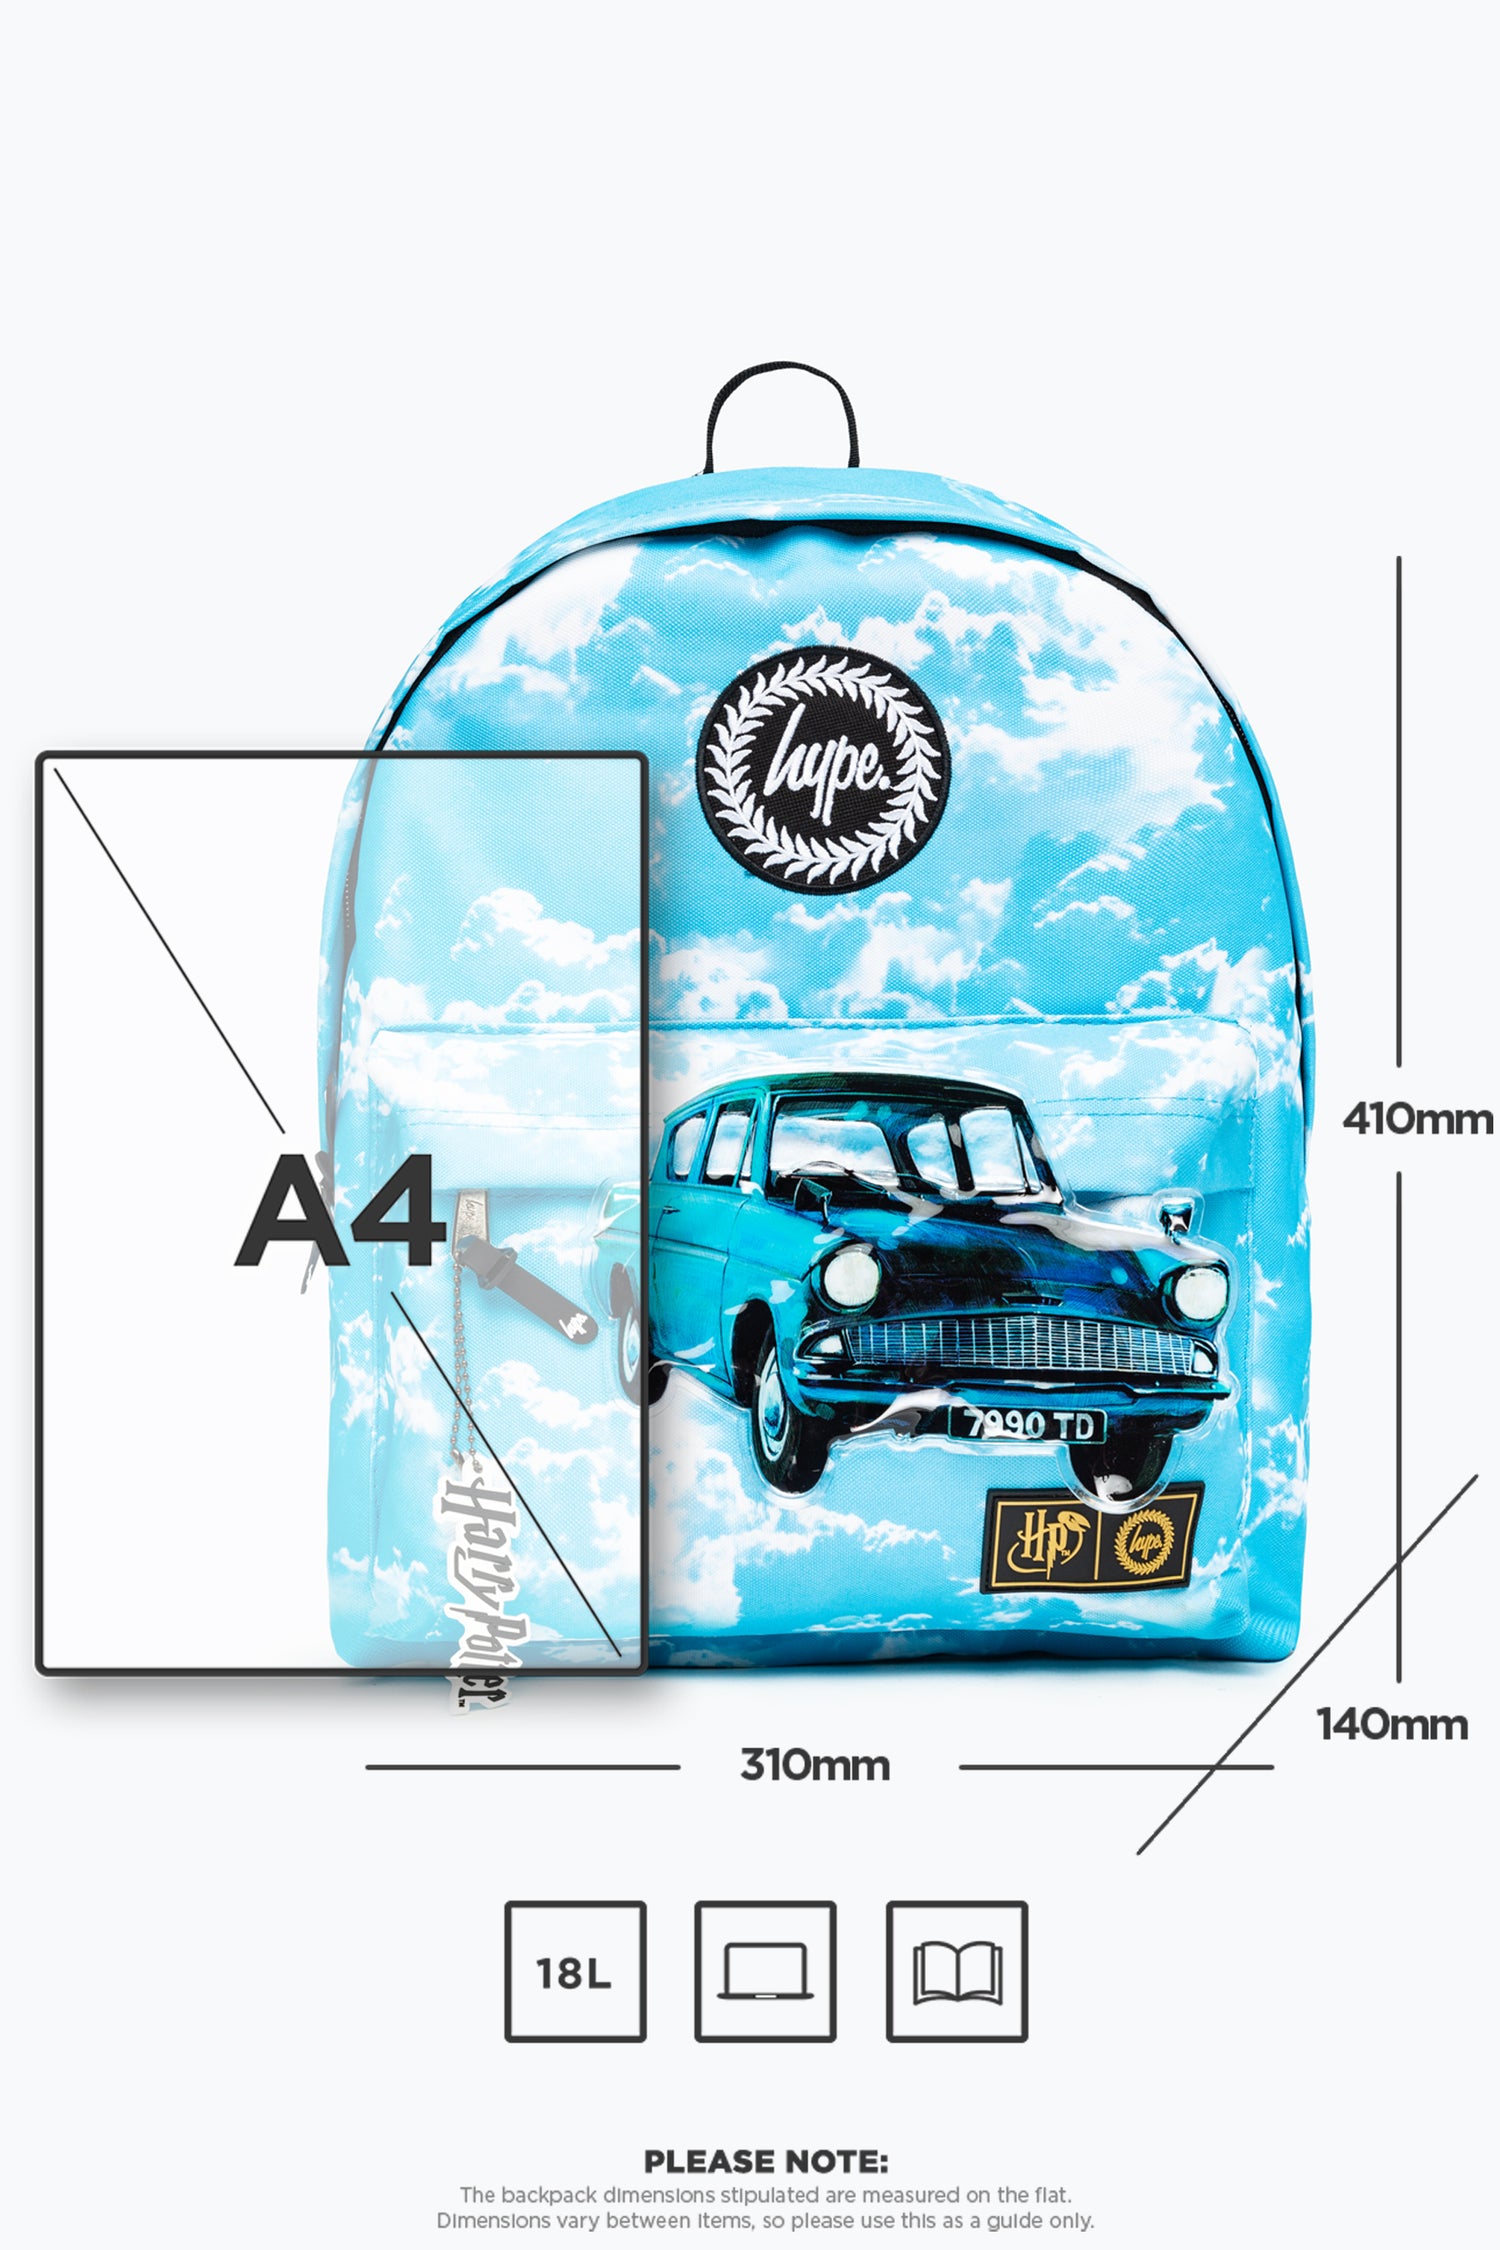 HARRY POTTER X HYPE. FLYING FORD ANGLIA BACKPACK